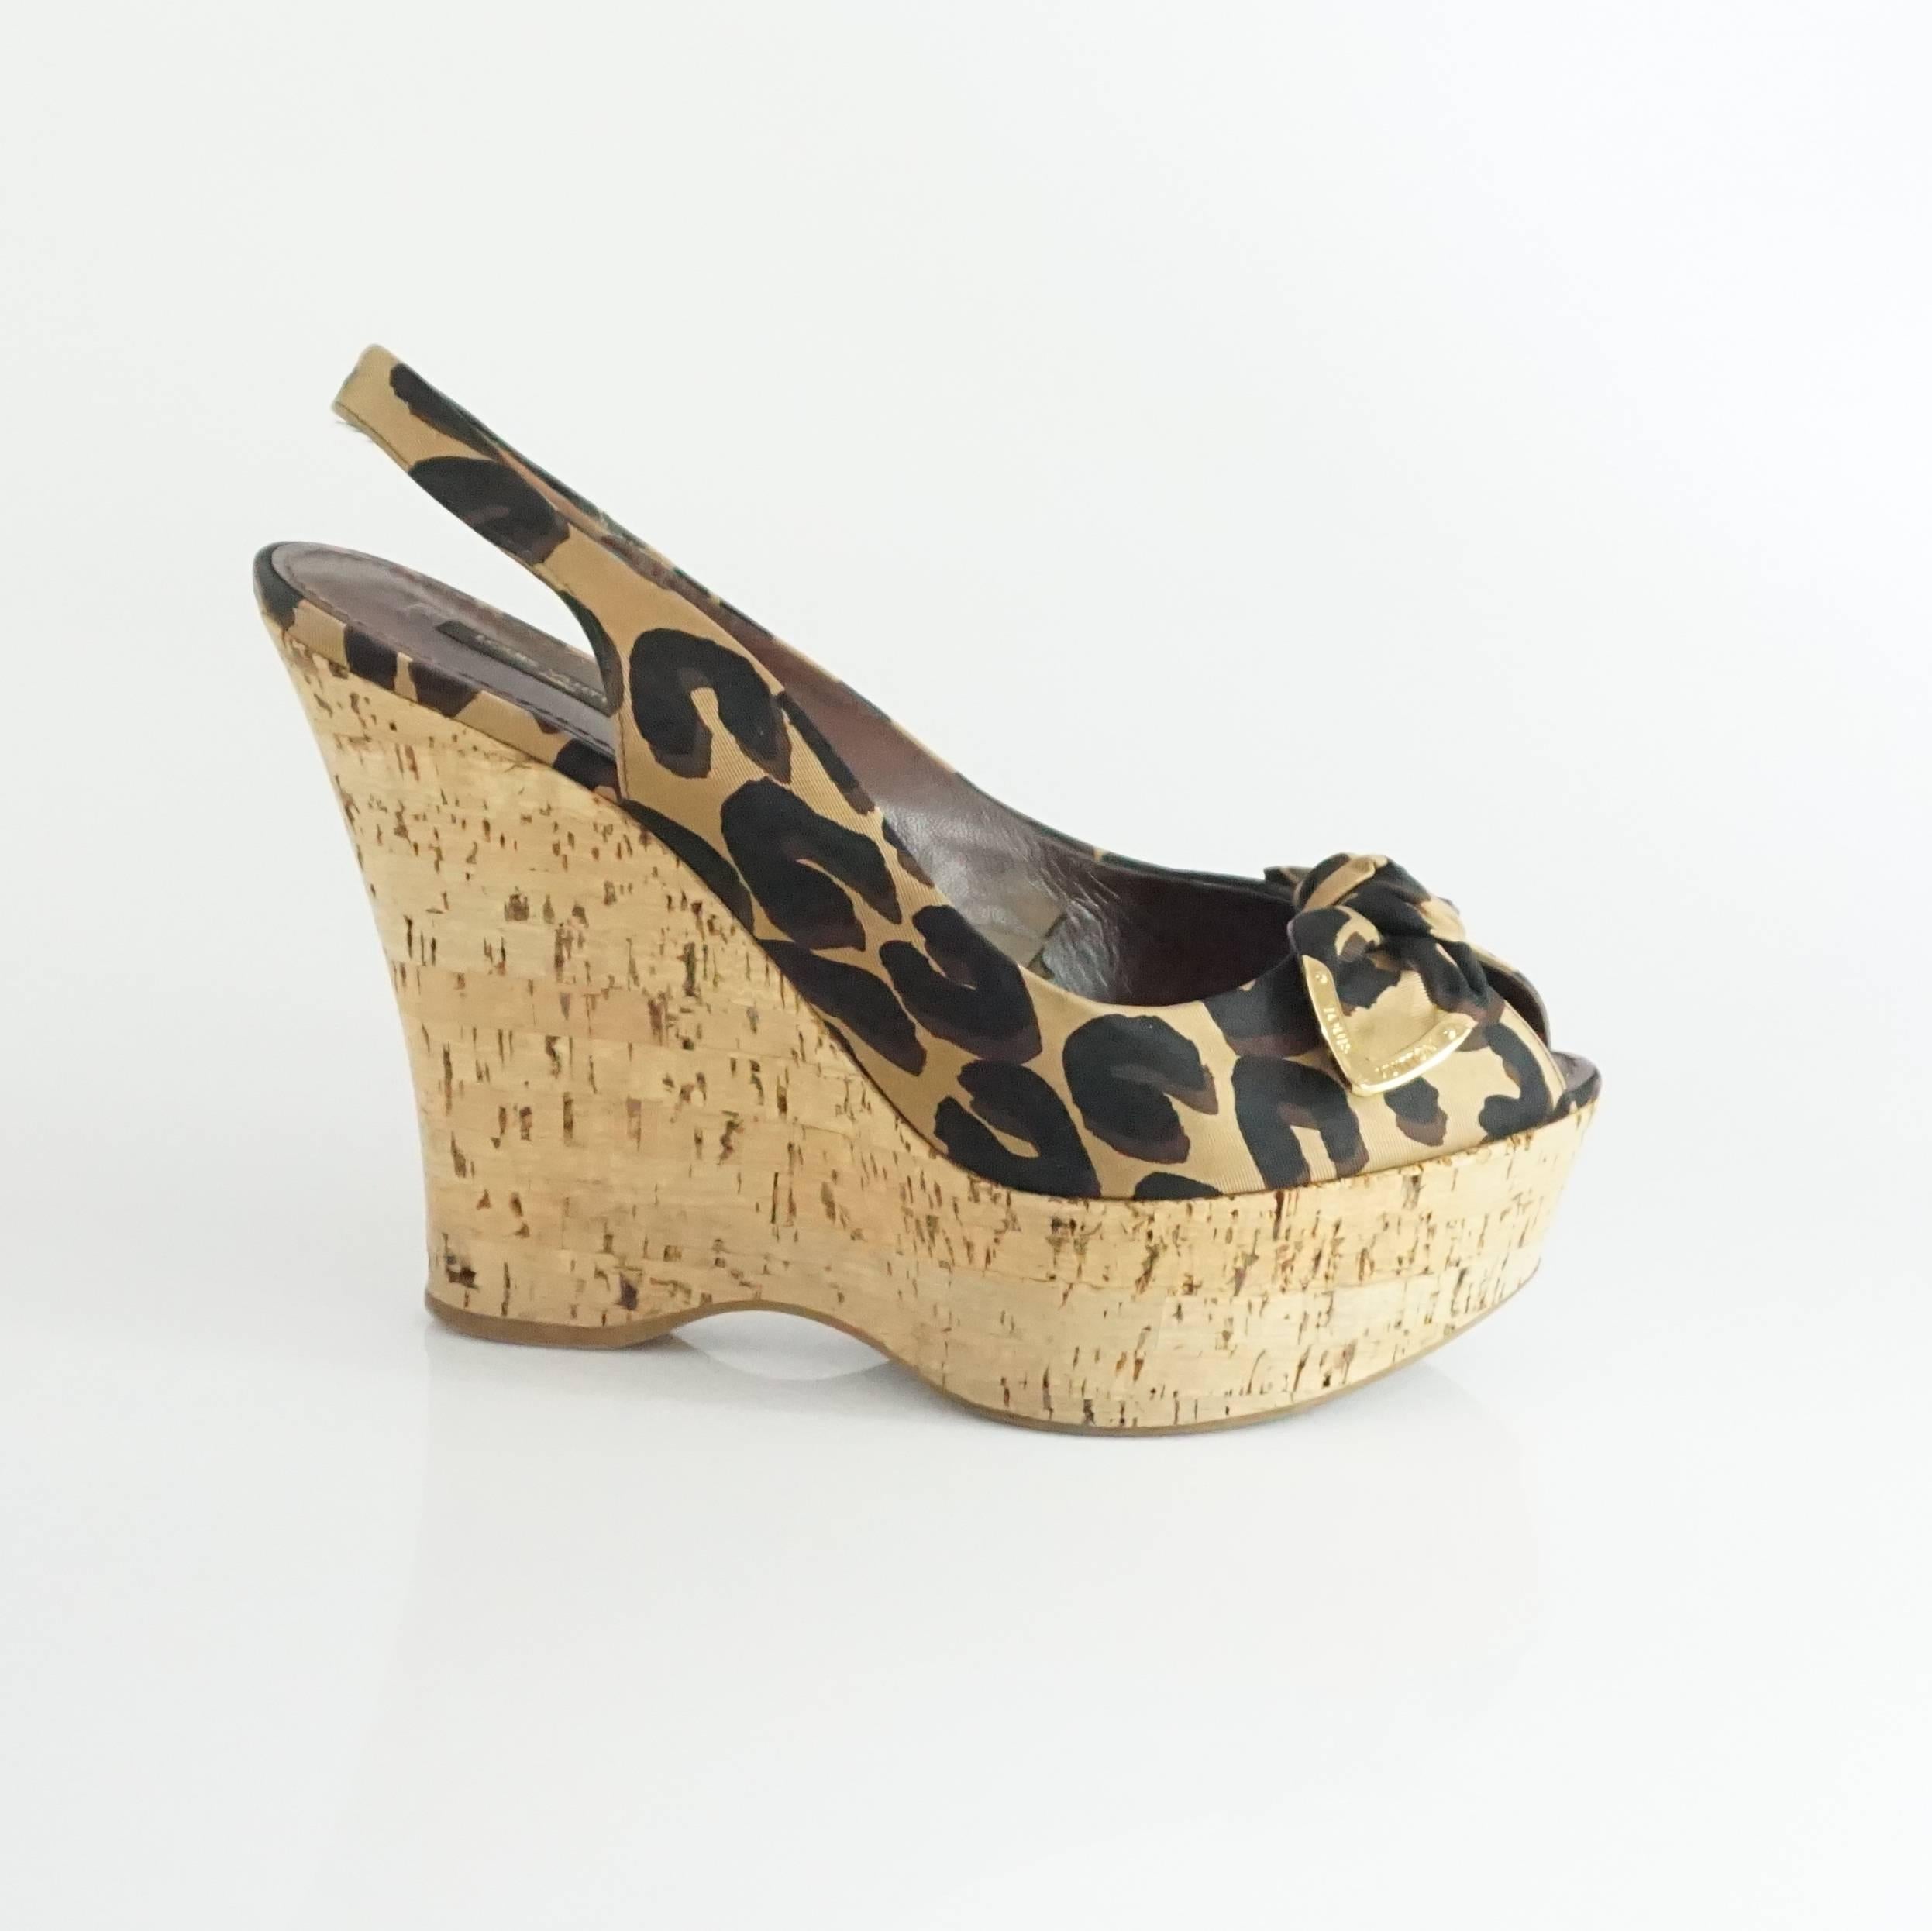 These Louis Vuitton wedges are animal print and are made of satin. They are slingback style with a front bow, cork heel, and peep-toe. They are in very good condition with minor wear on the bottom and in one area inside as shown in the image. Size